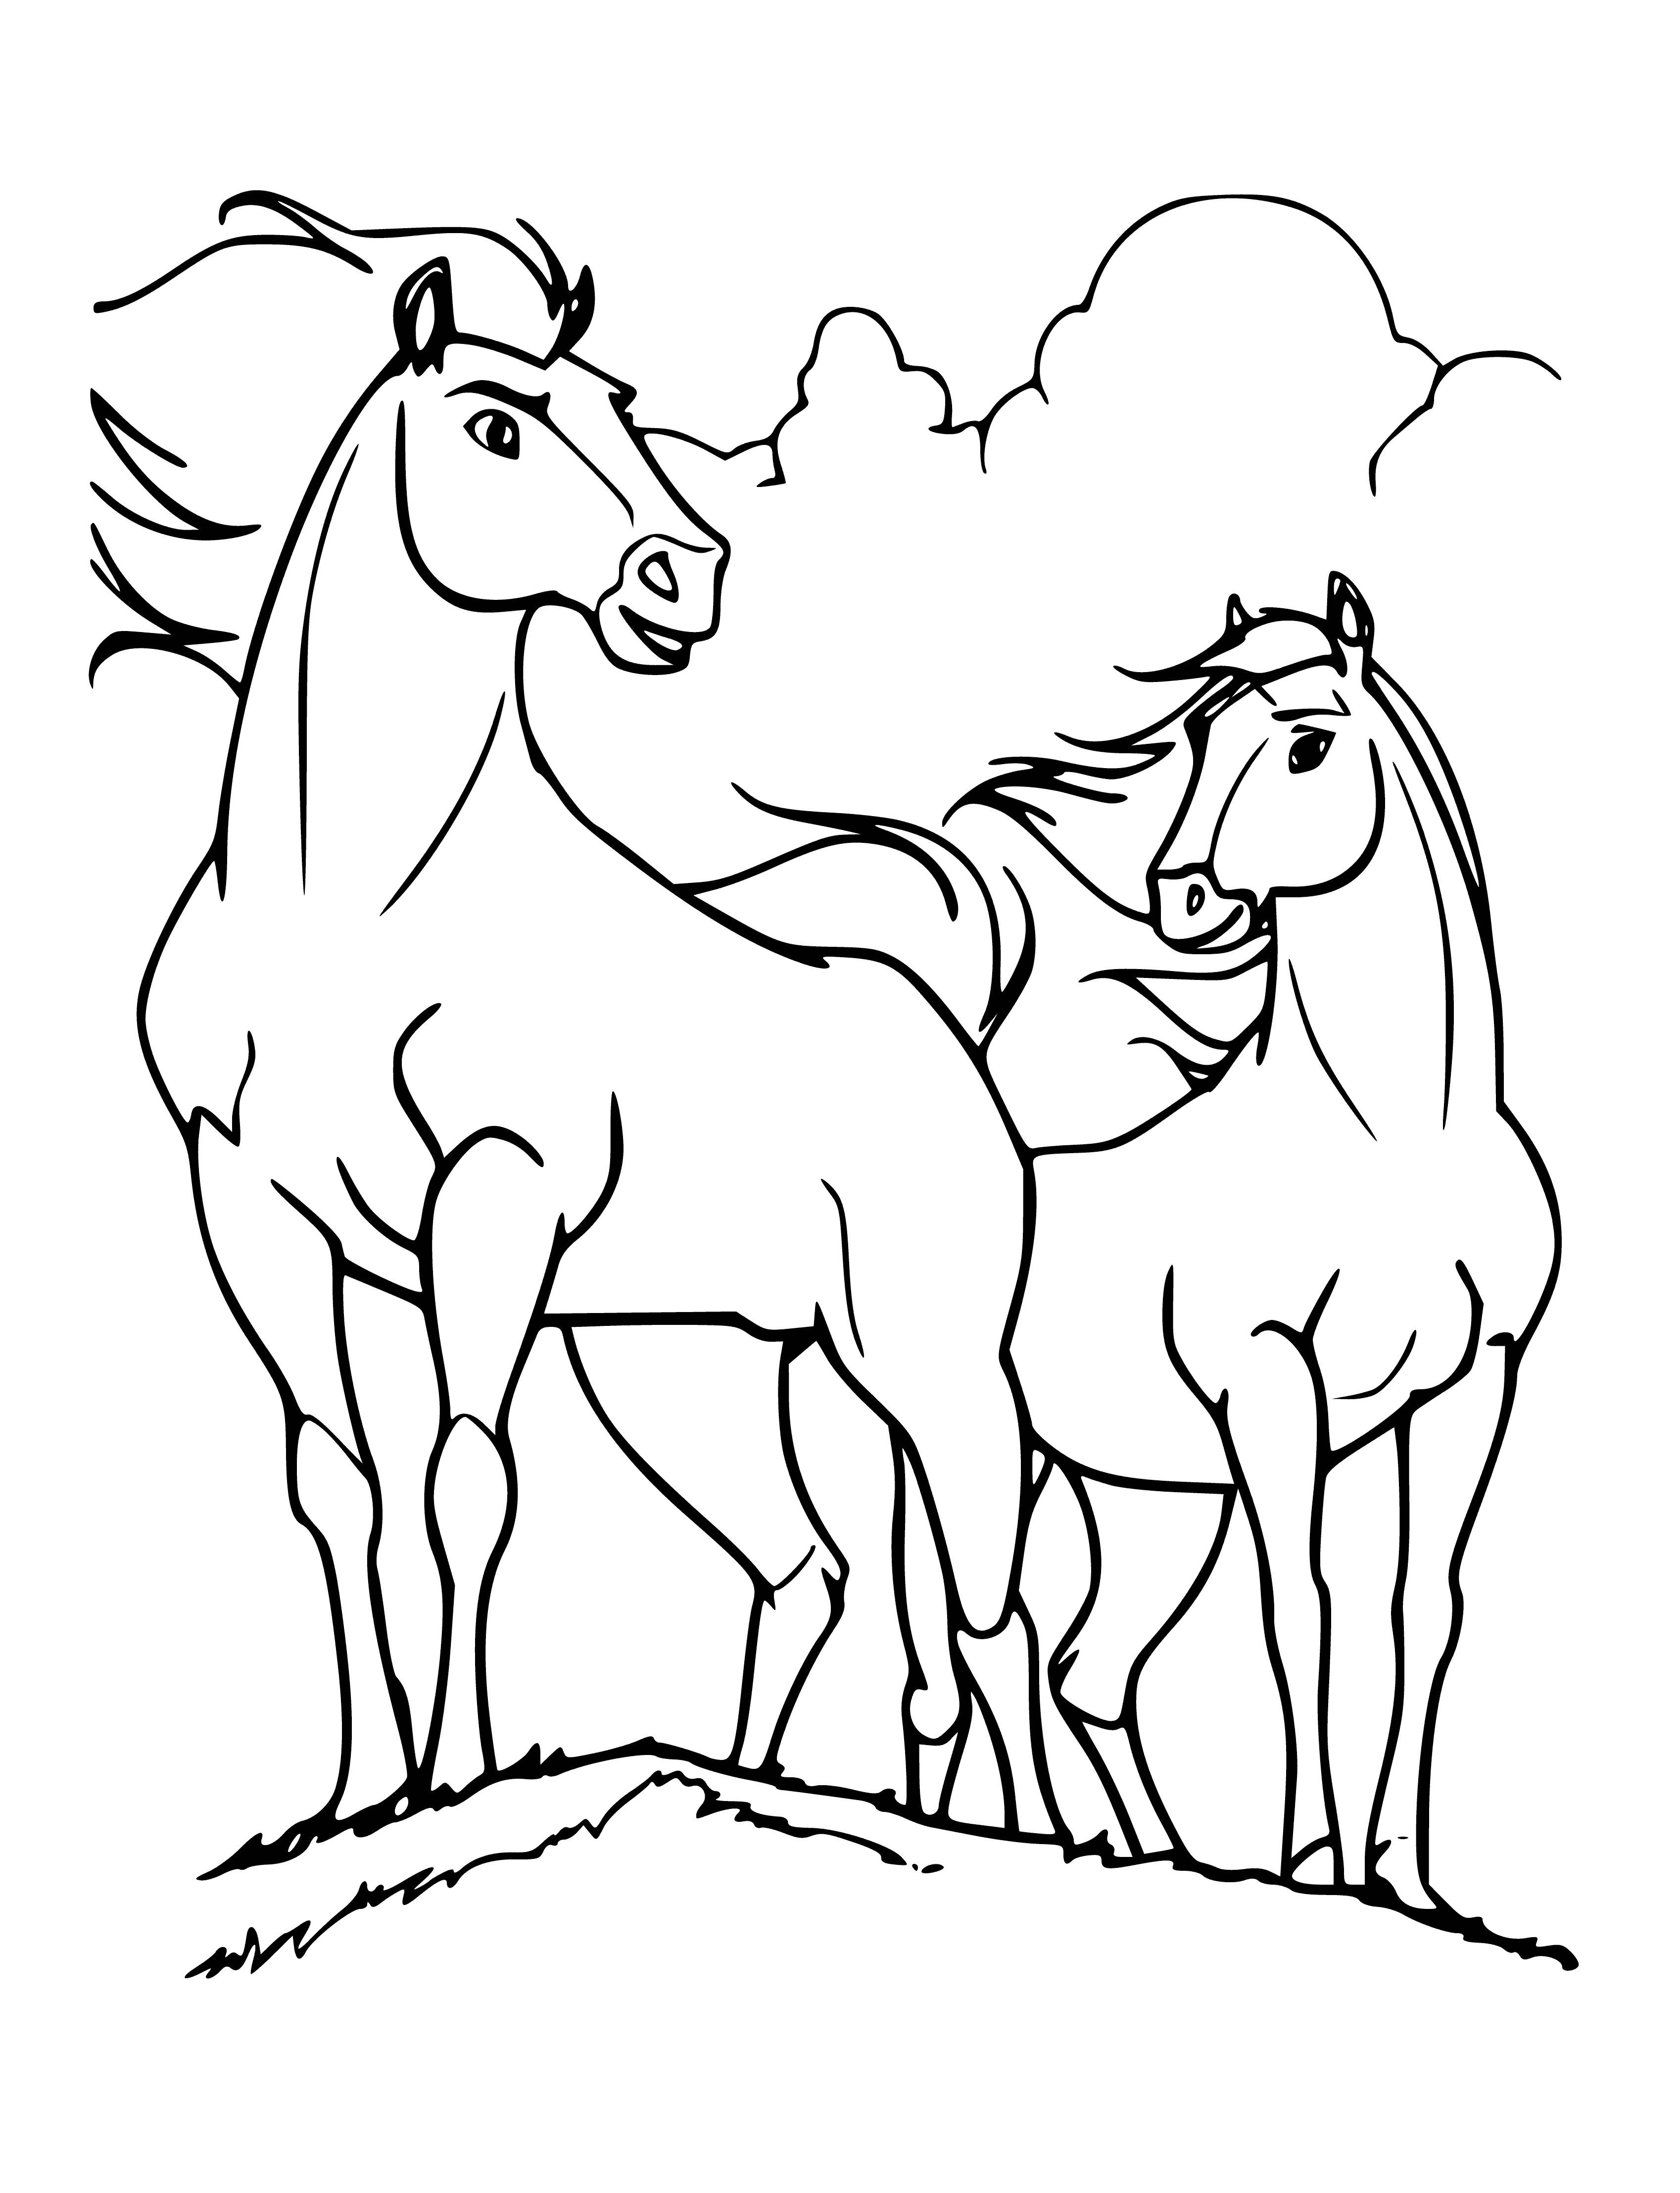 coloring page: A wild mustang runs through a field, its mane blowing in the wind, showing its power and freedom in all its beauty.